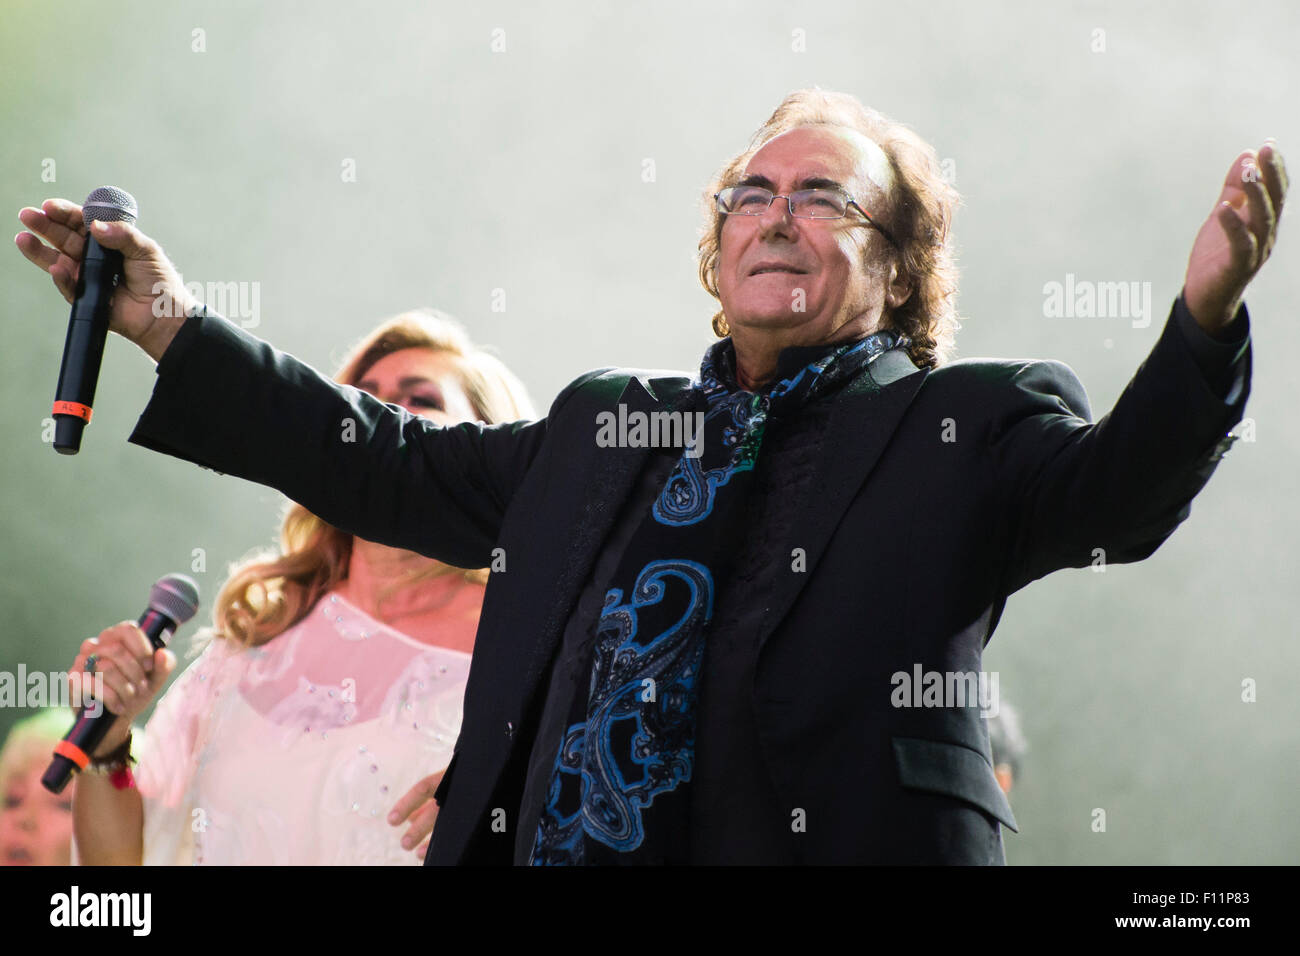 Berlin, Germany. 21st Aug, 2015. Singing duo Romina Power (L) and Albano Carrisi (Al Bano) perform on stage during a concert in Berlin, Germany, 21 August 2015. The concert was their first in the German-speaking region in 20 years. Photo: Gregor Fischer/dpa/Alamy Live News Stock Photo